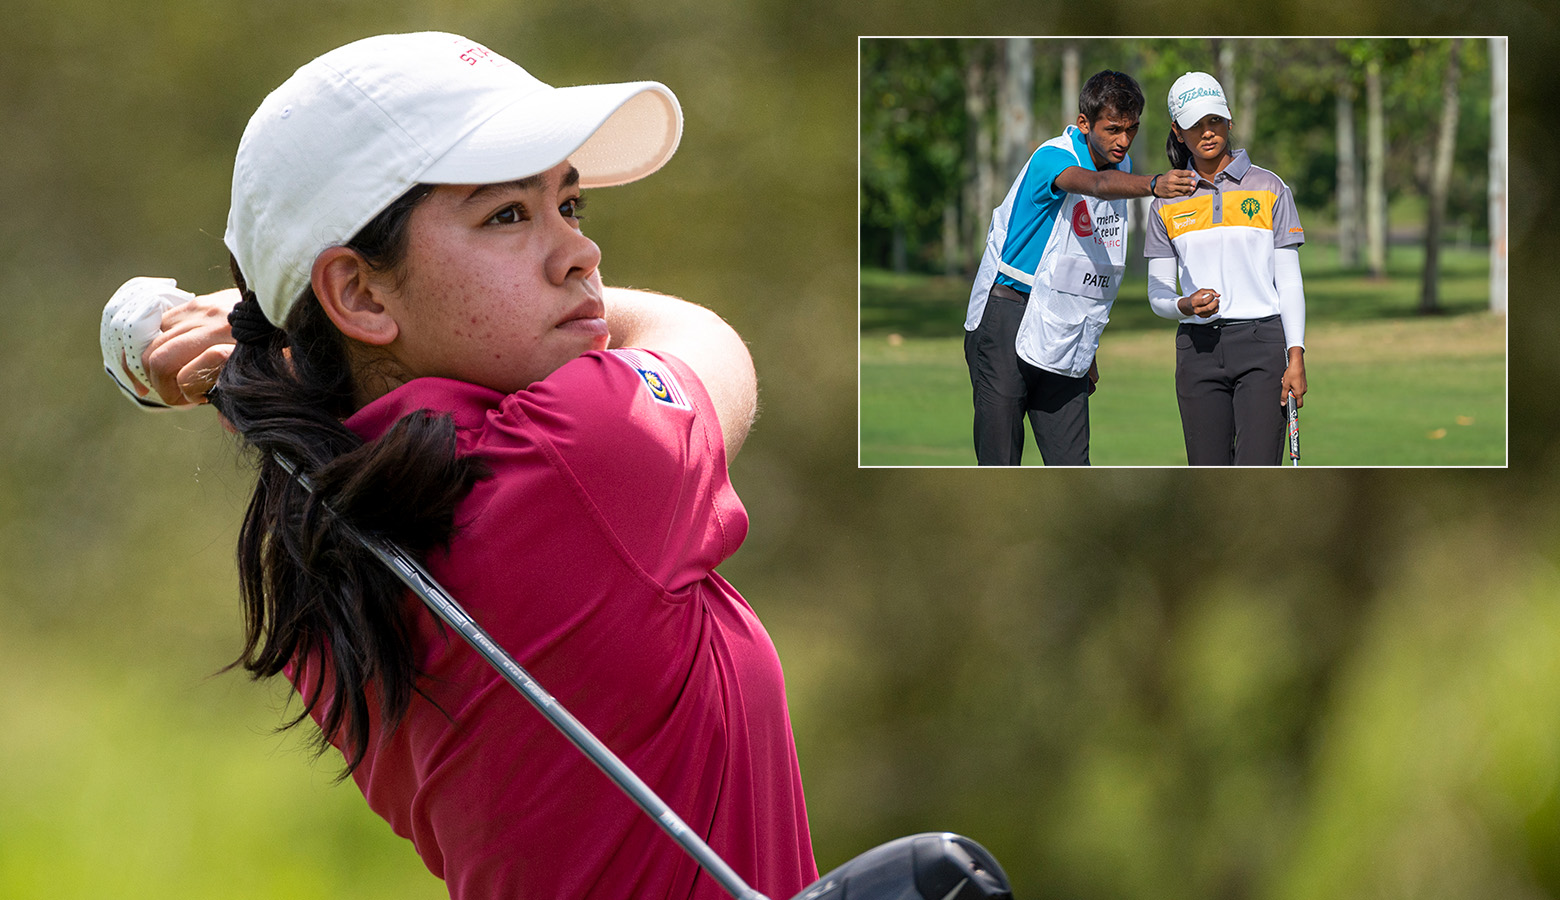 Avani first Indian to play on Asia Pac Team - India Golf Weekly